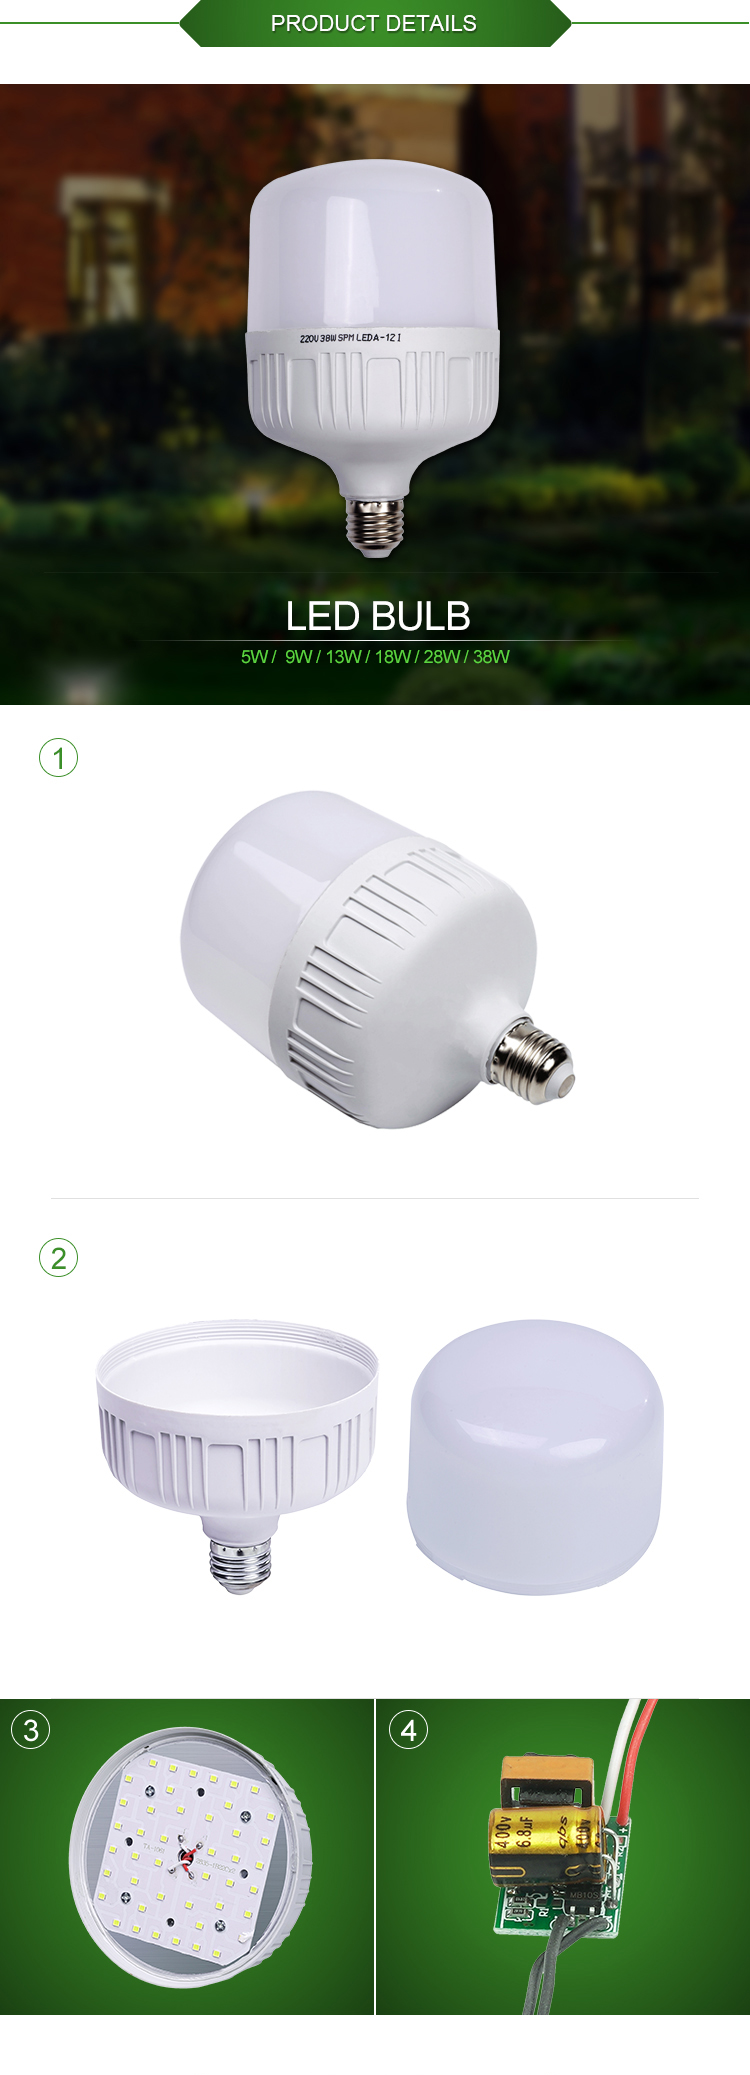 Hot Products light bulb camera wifi With High Quality